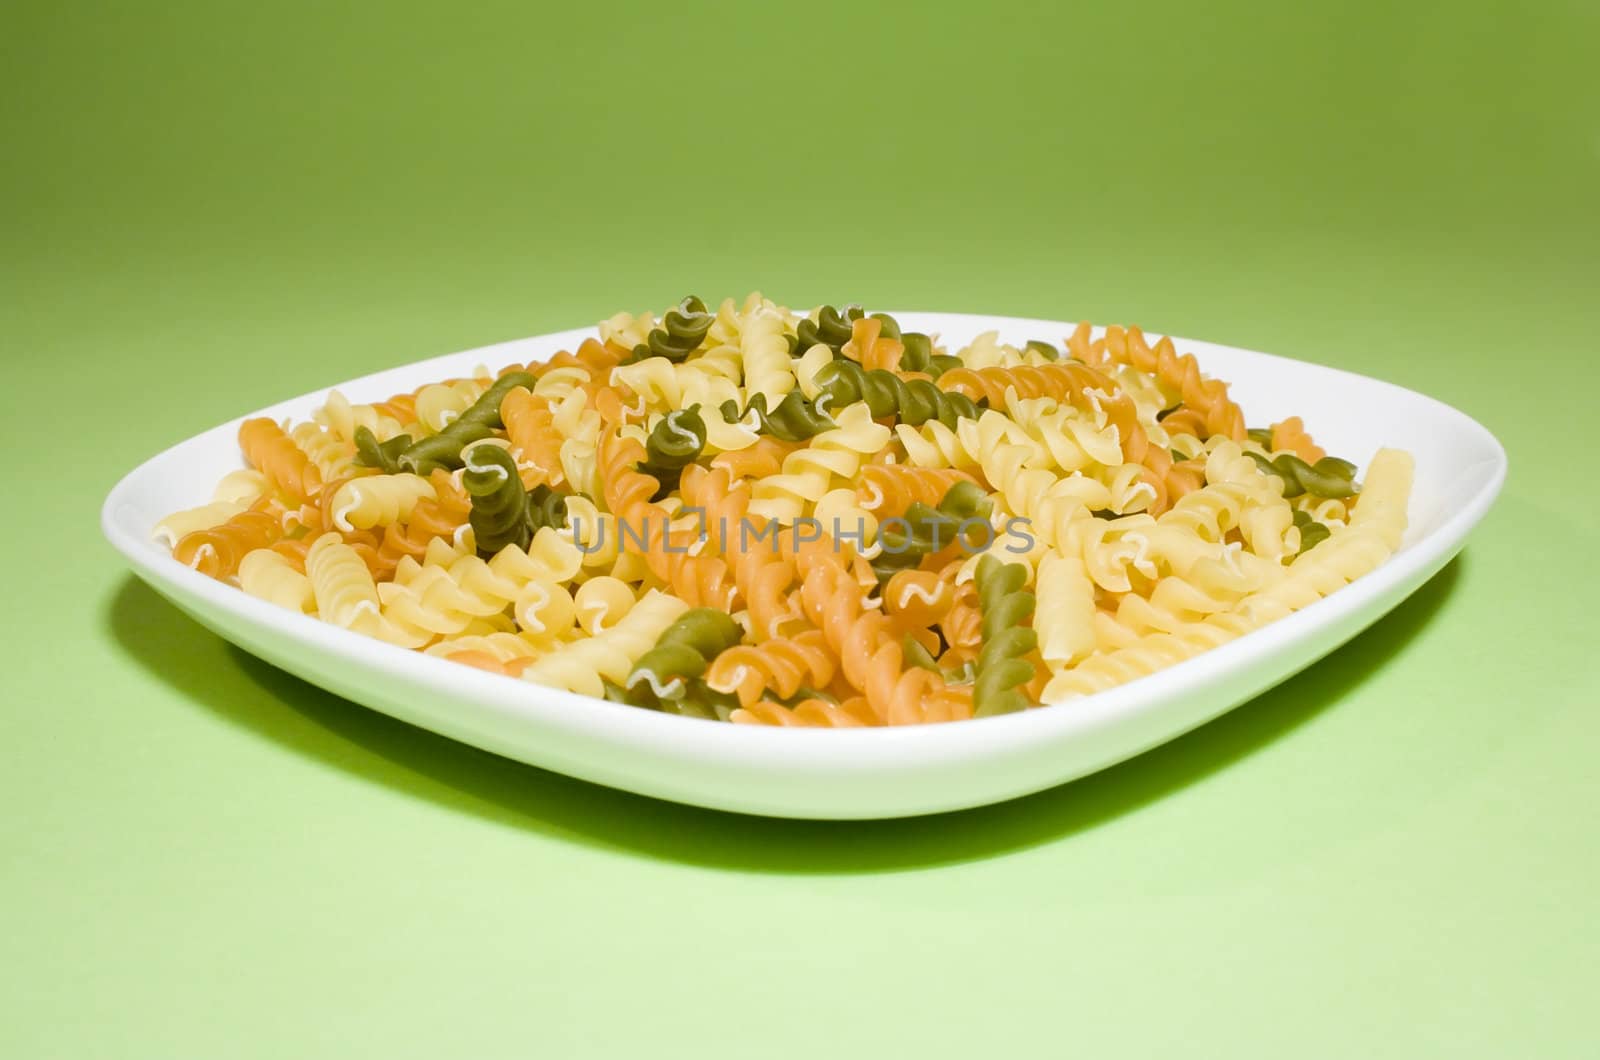 Pasta on green background (on white plate)